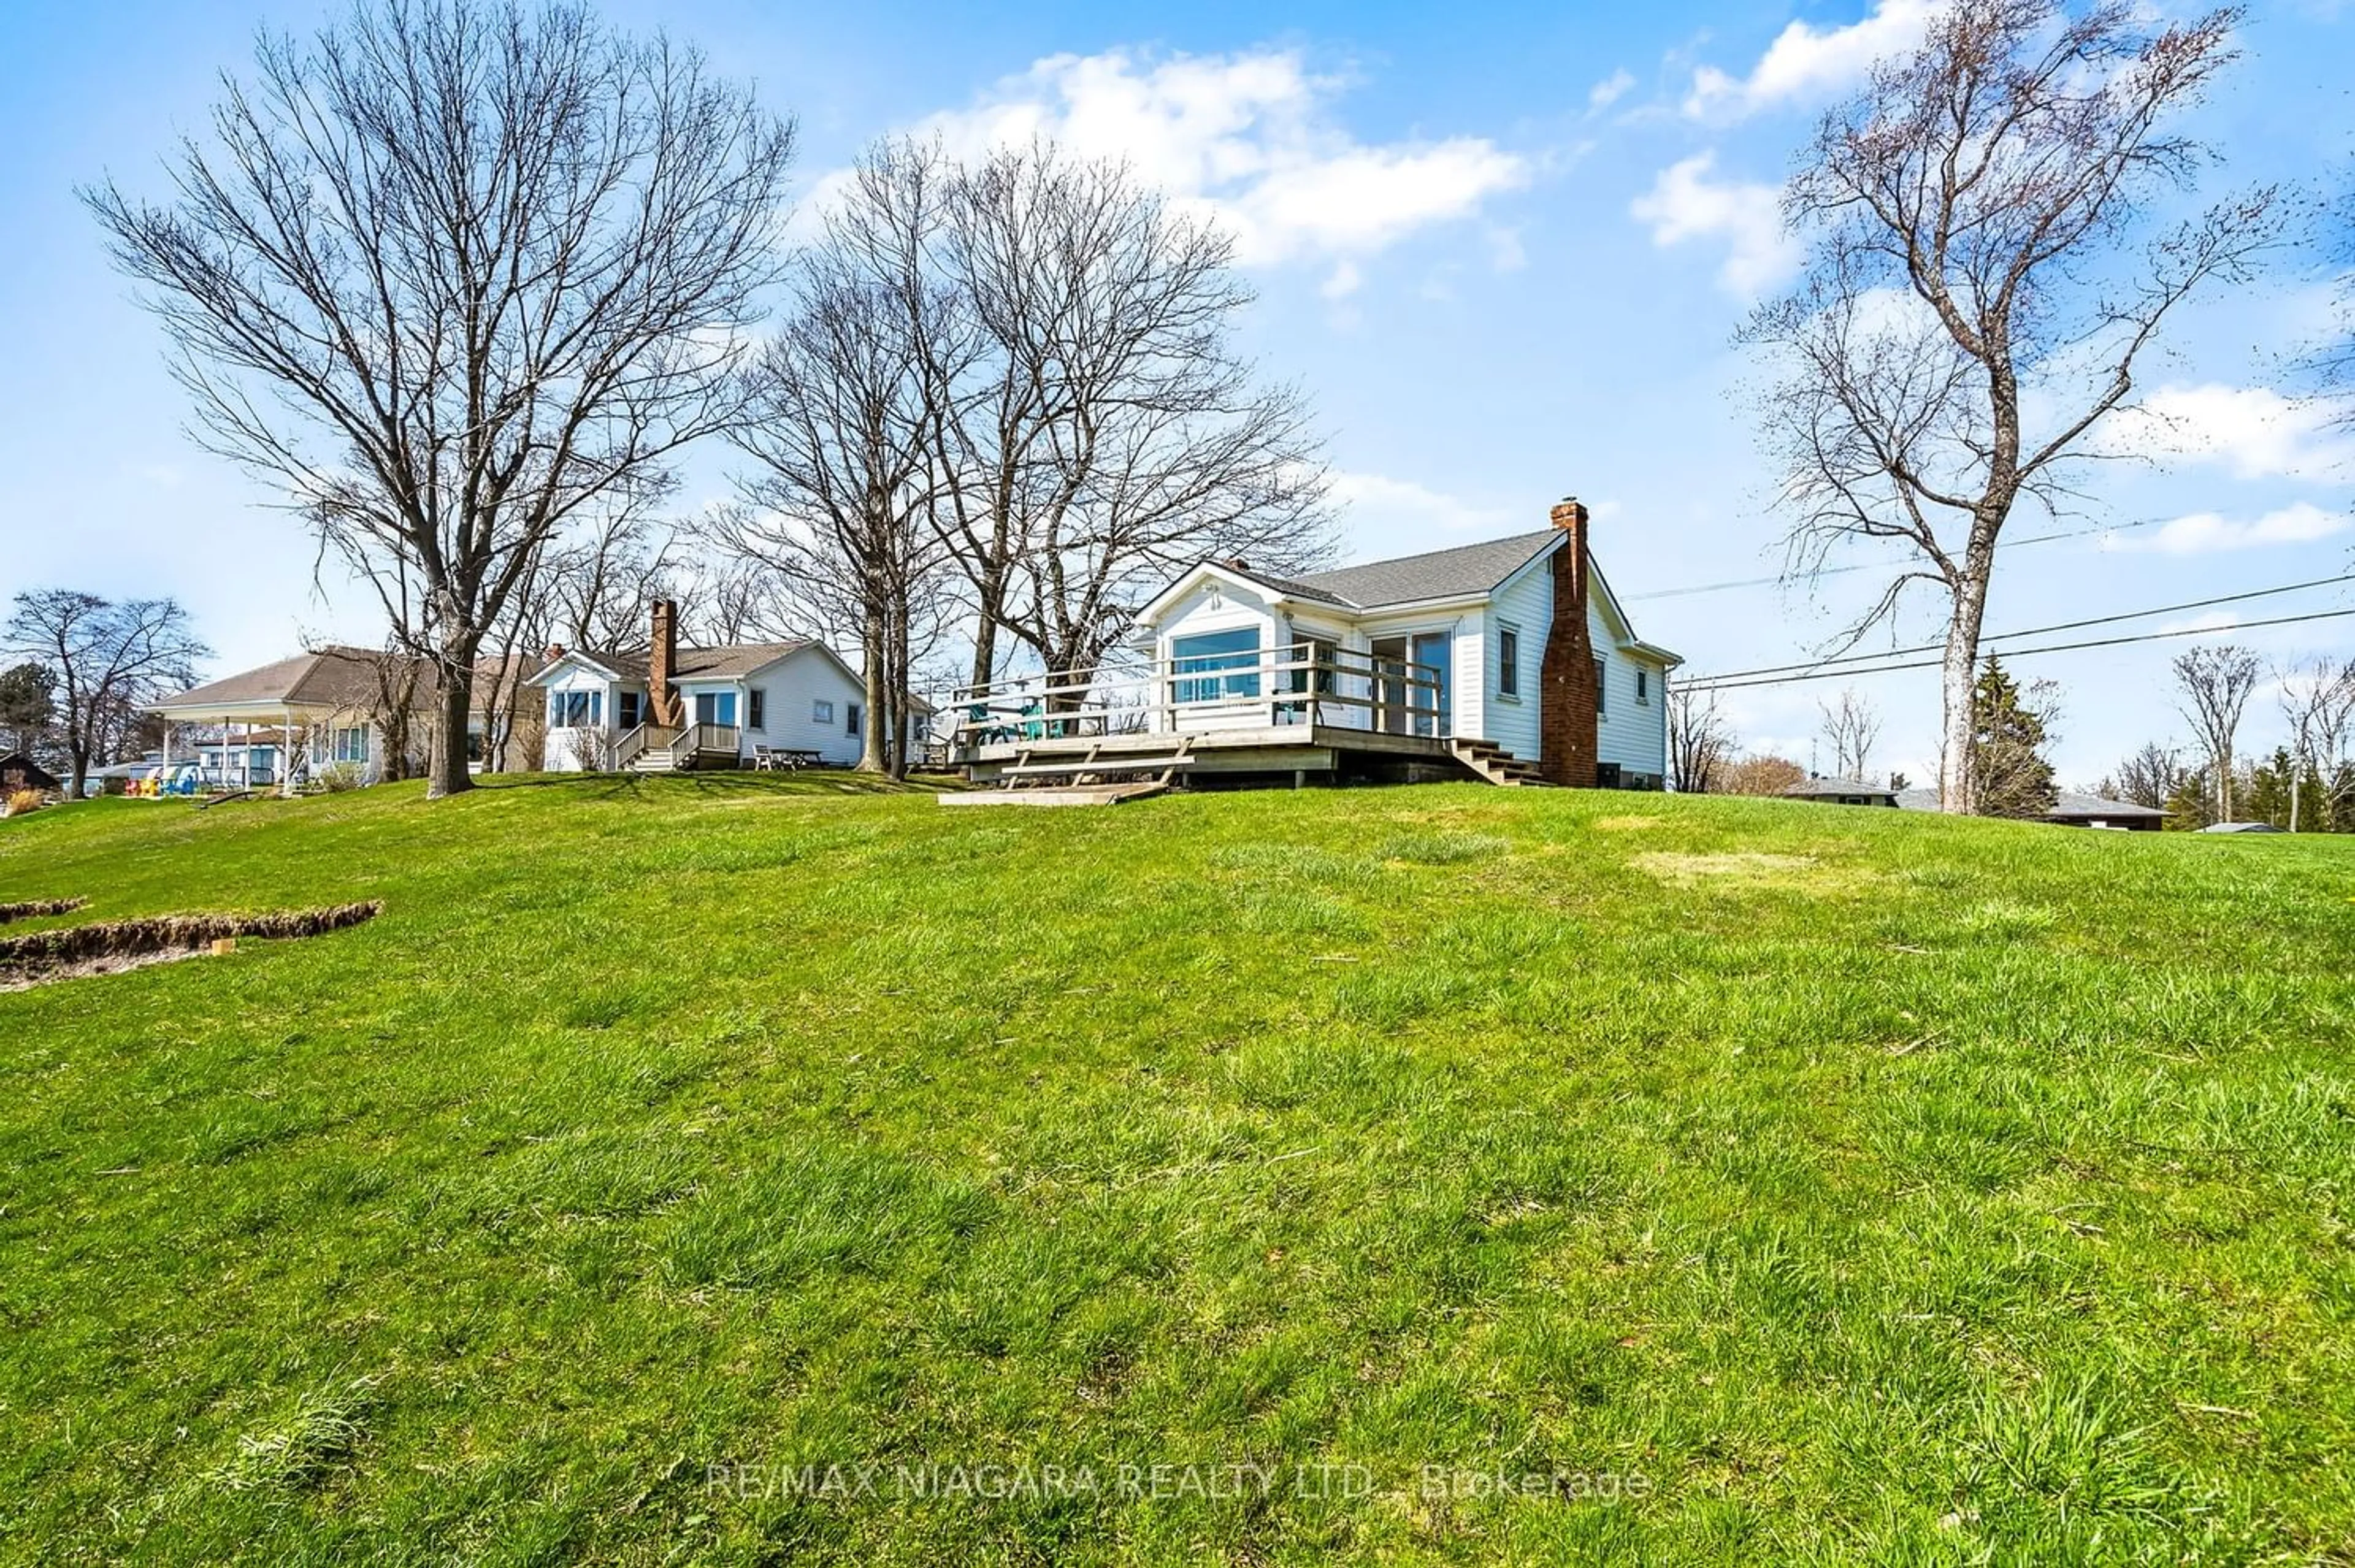 Frontside or backside of a home for 13165 Lakeshore Rd, Wainfleet Ontario L0S 1V0